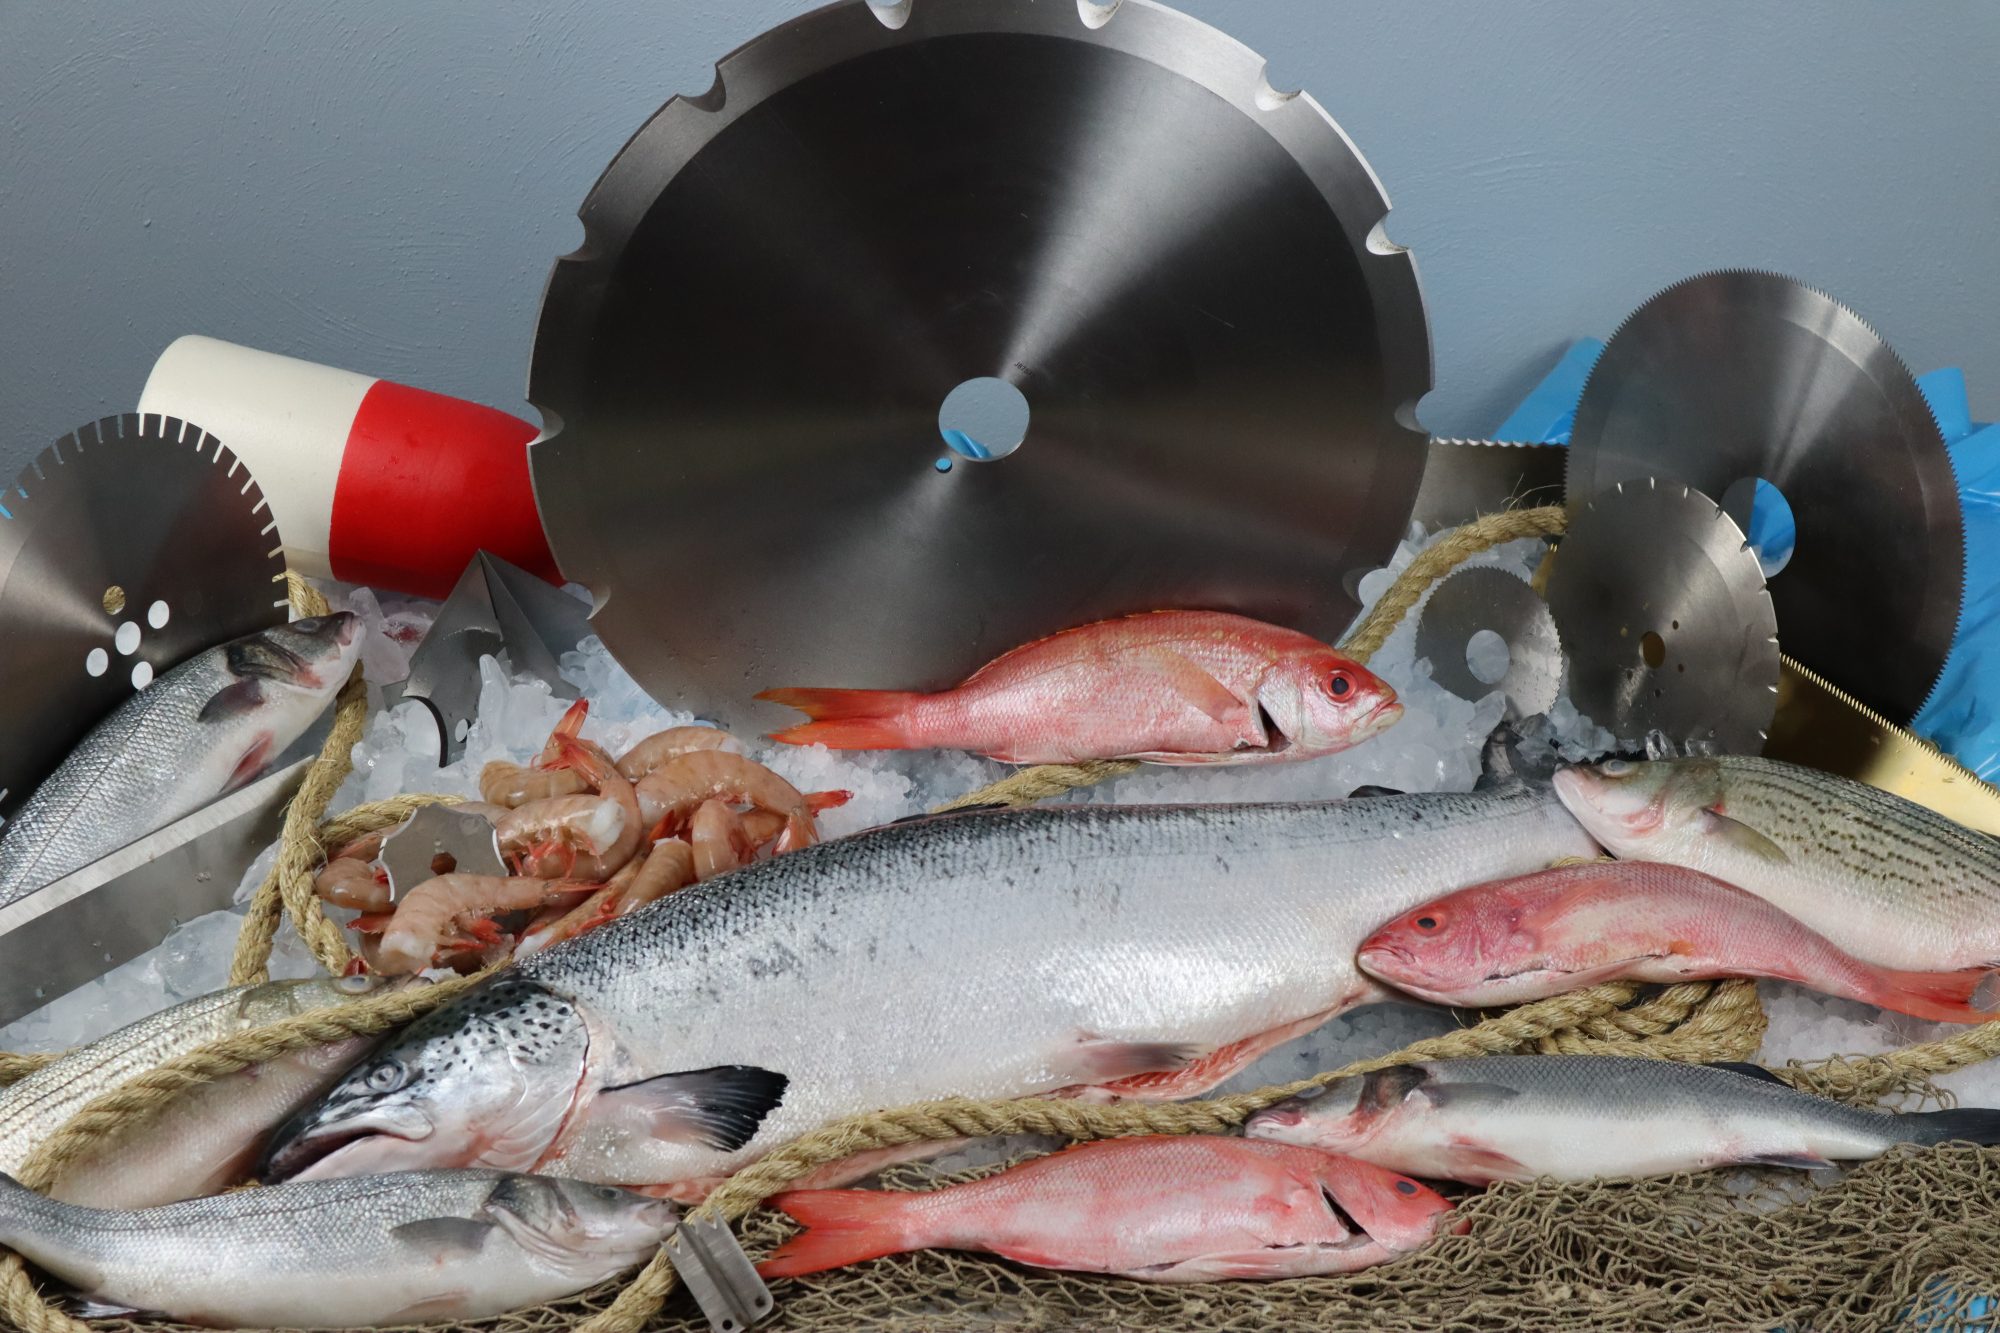 Industrial Machine Blades & Knives For Seafood Processing